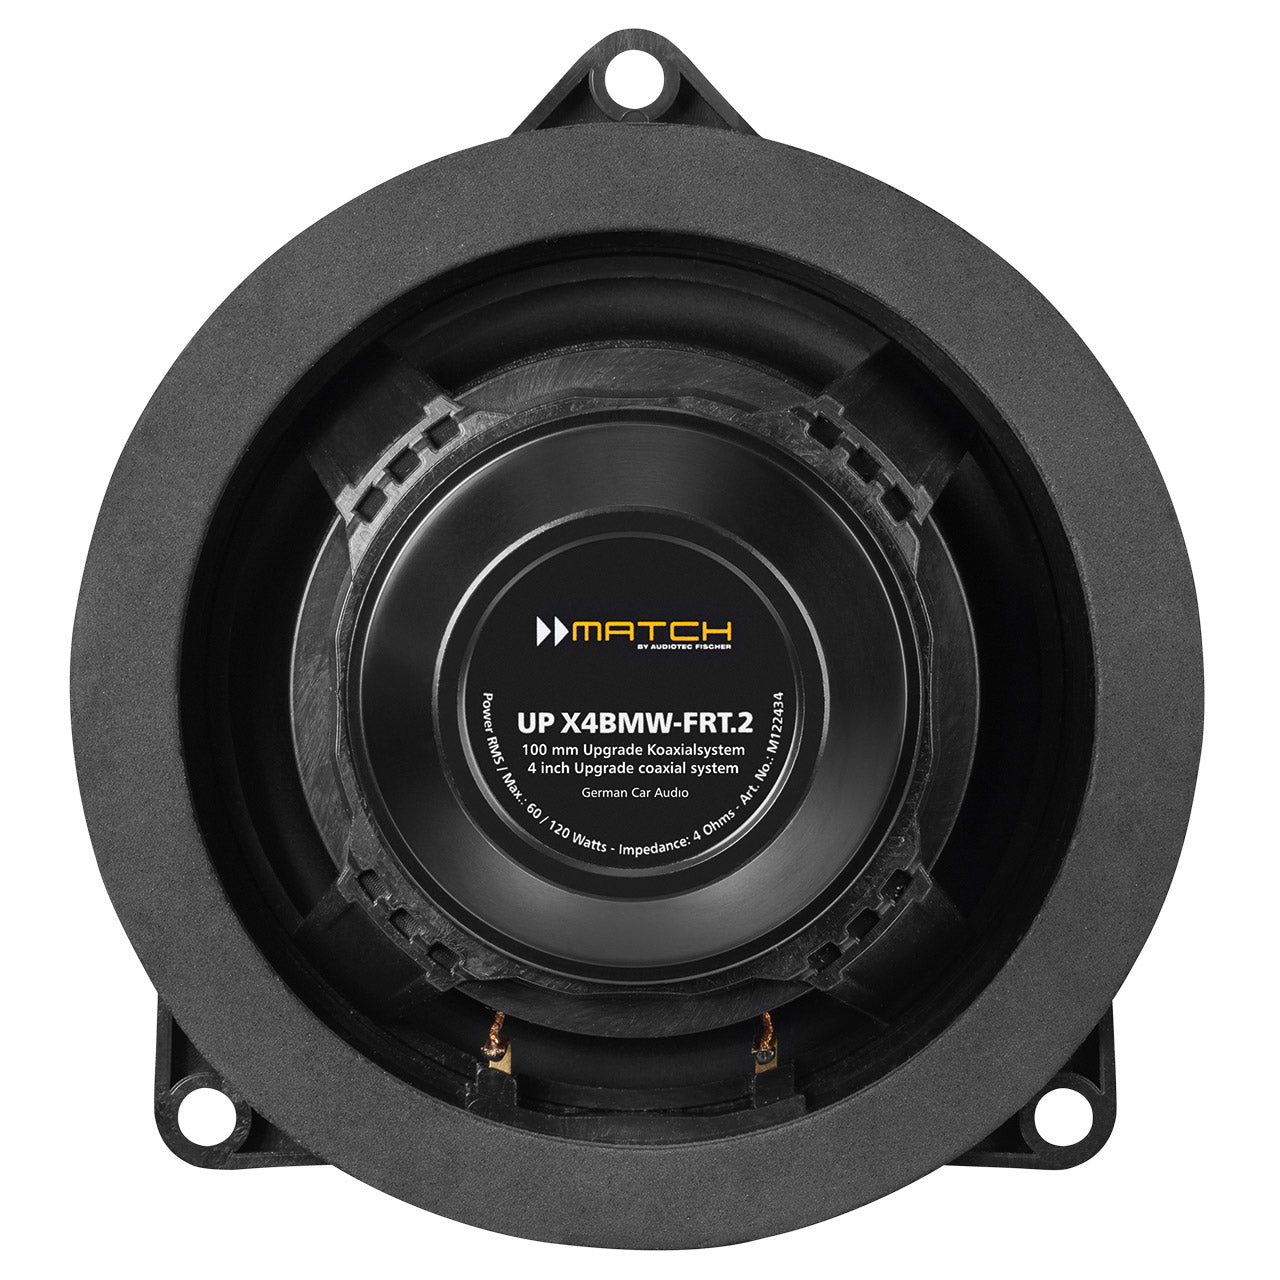 Match Up X4BMW-FRT.2 Coaxial Speakers